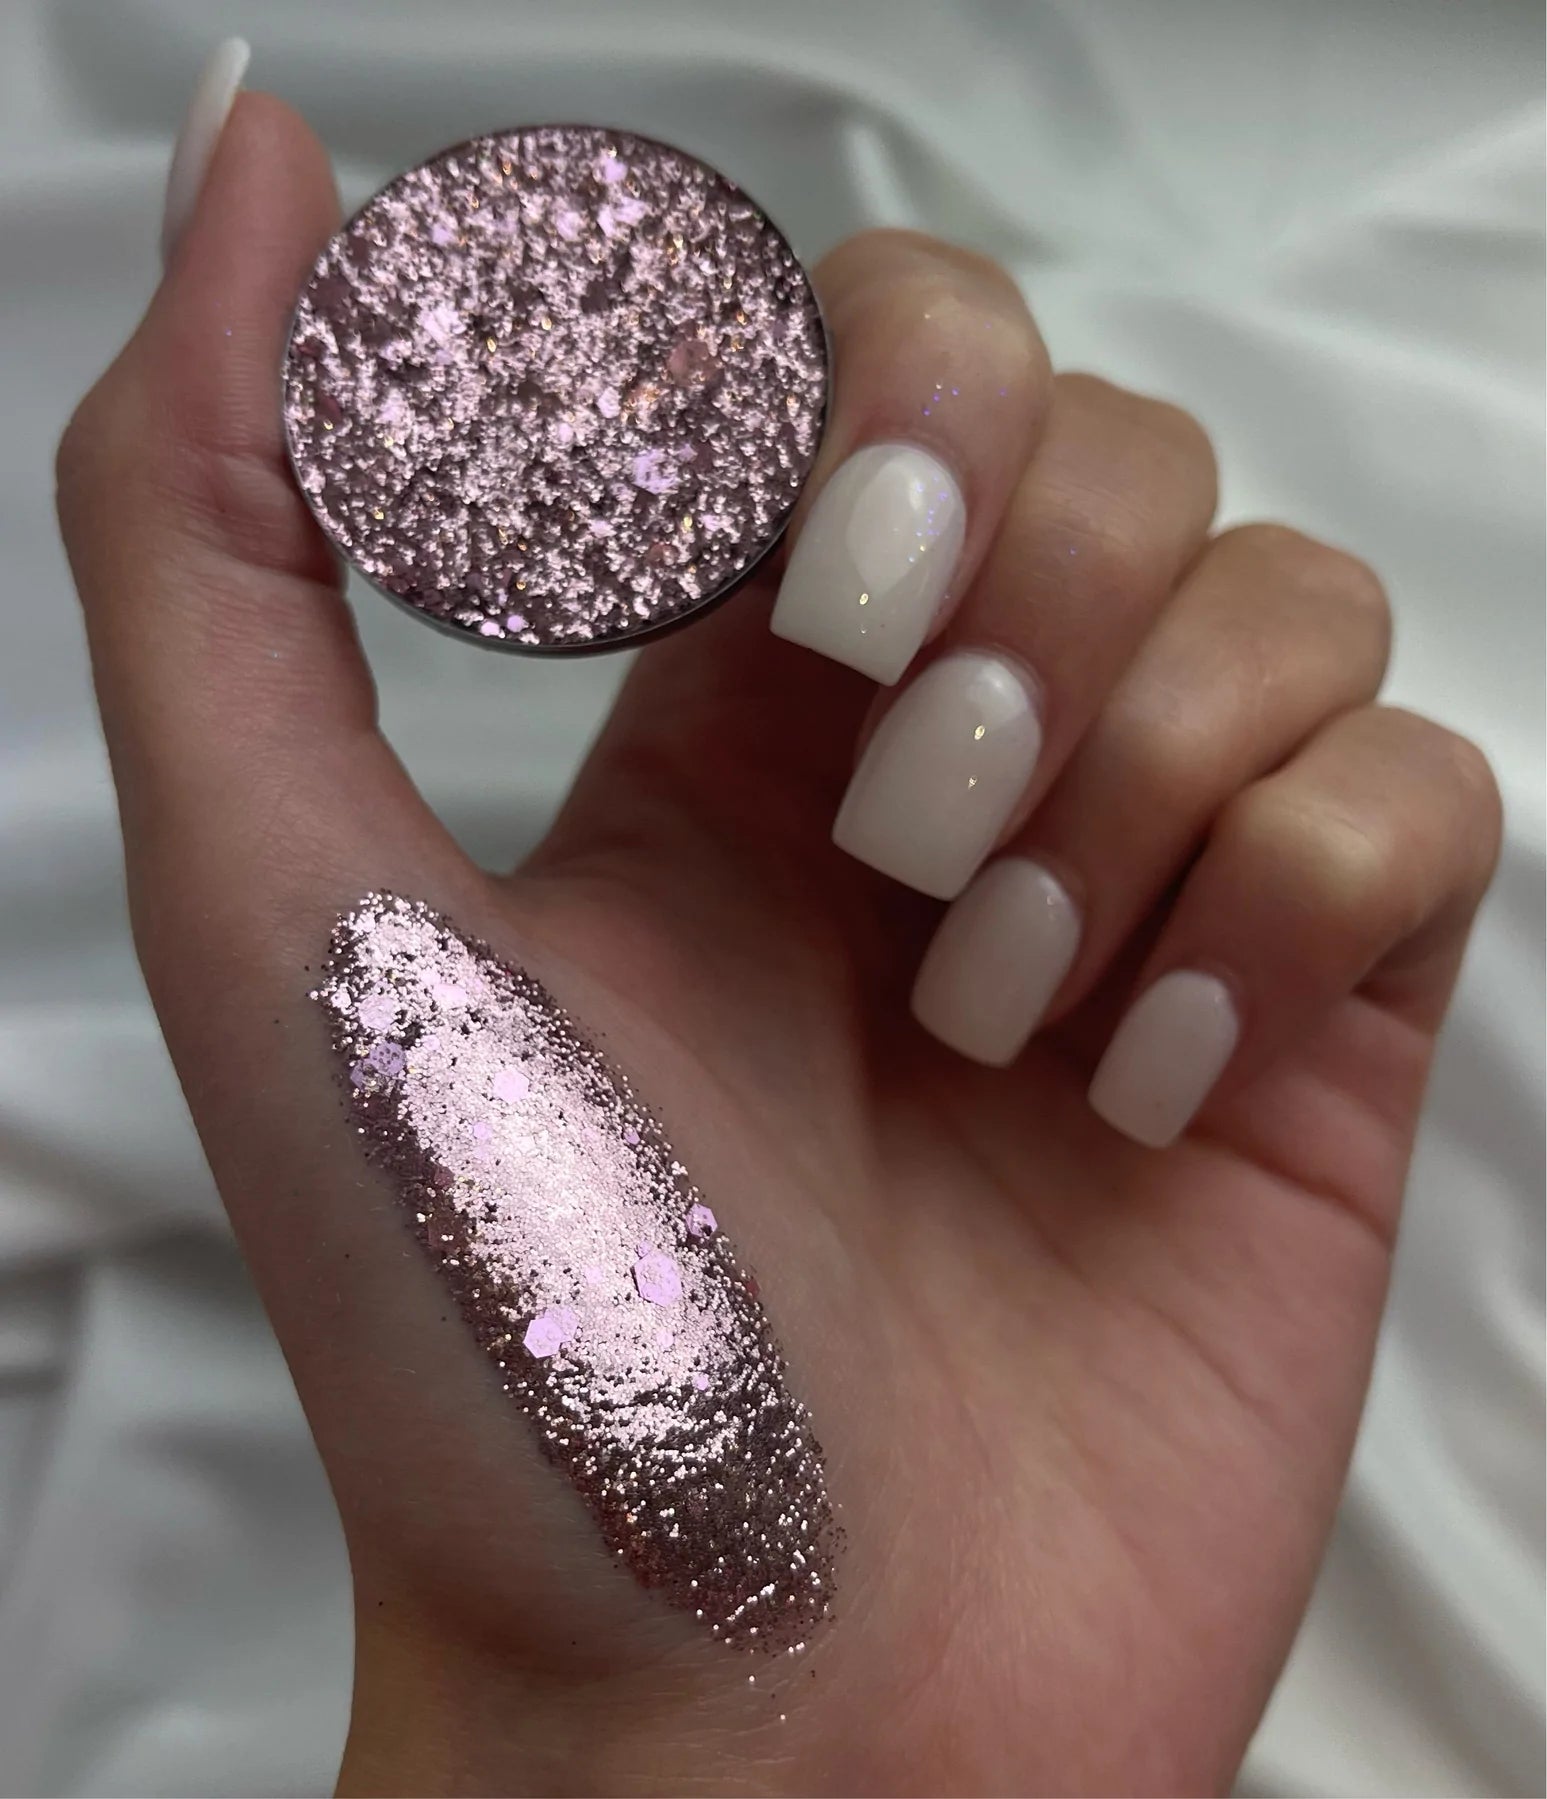 With Love Cosmetics - Pressed Glitter Baby Pink Crushed Diamonds